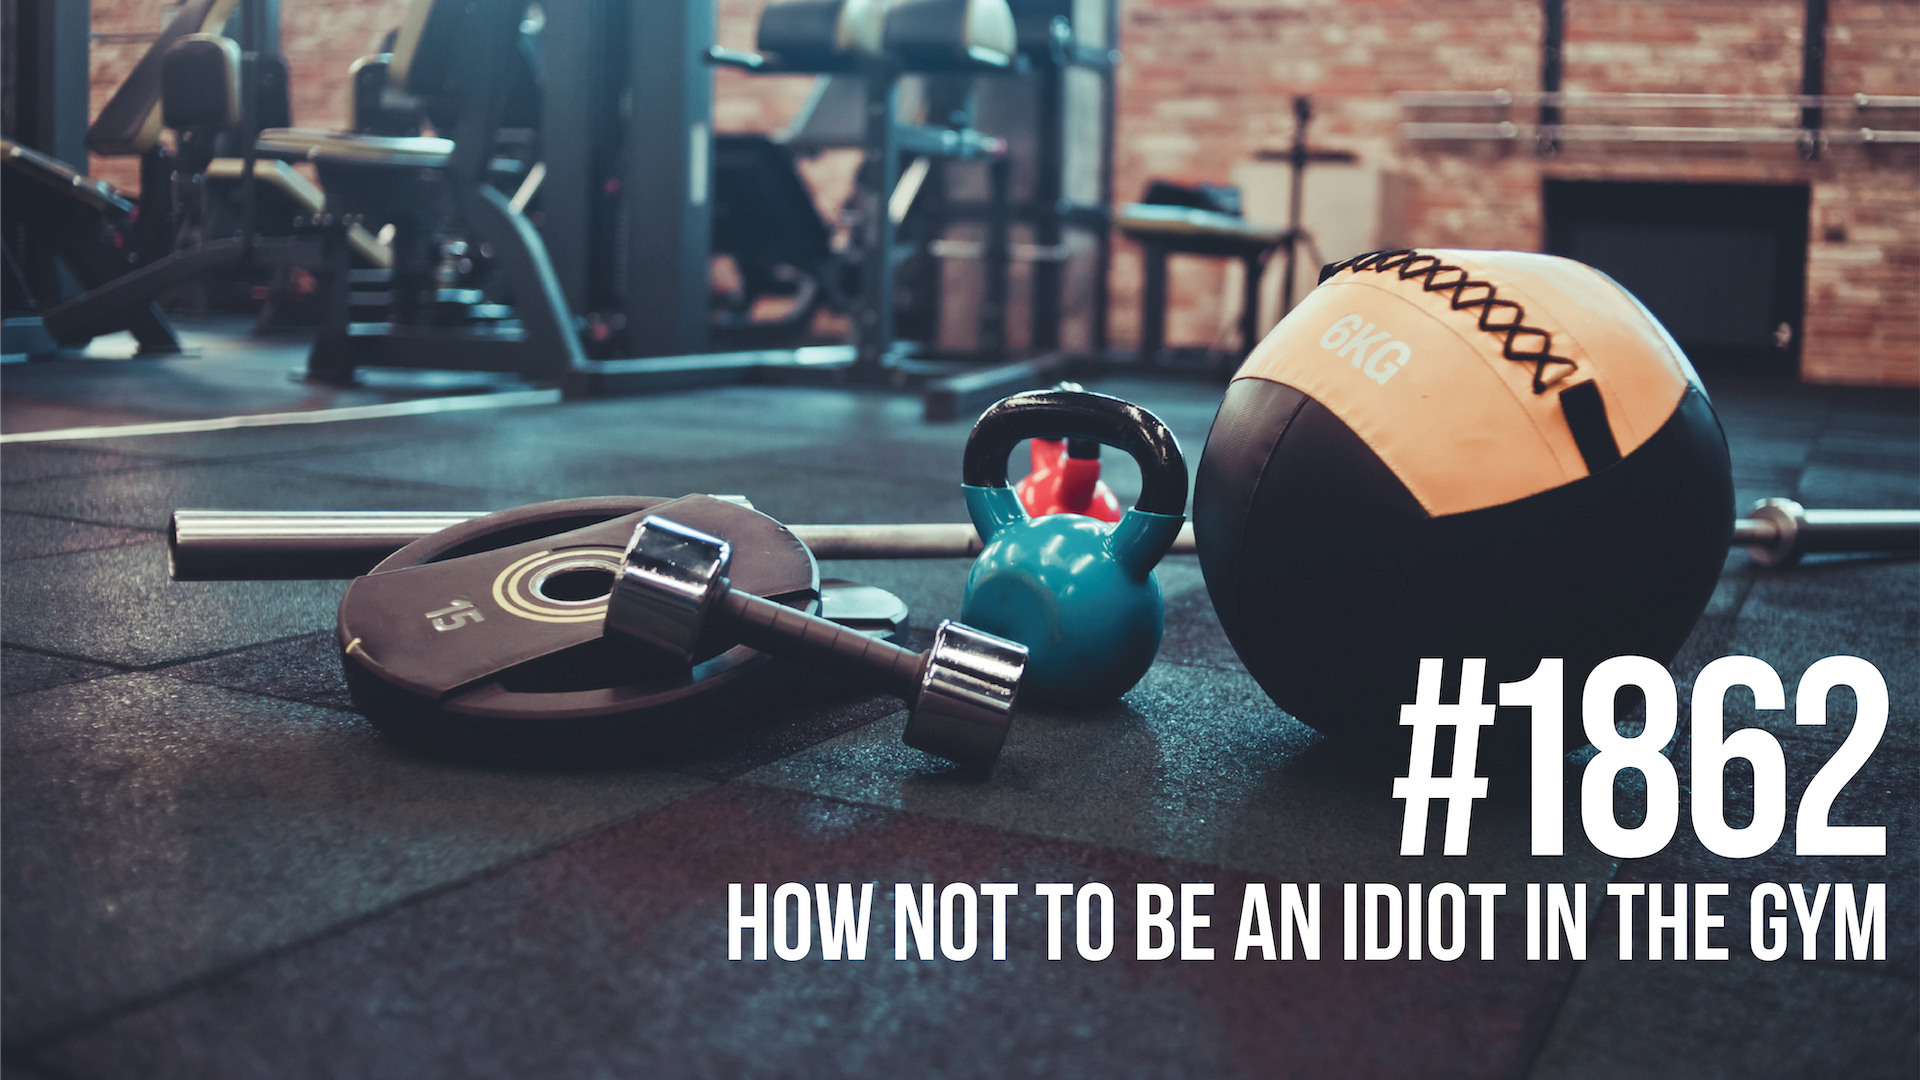 1862: How NOT to Be an Idiot in the Gym